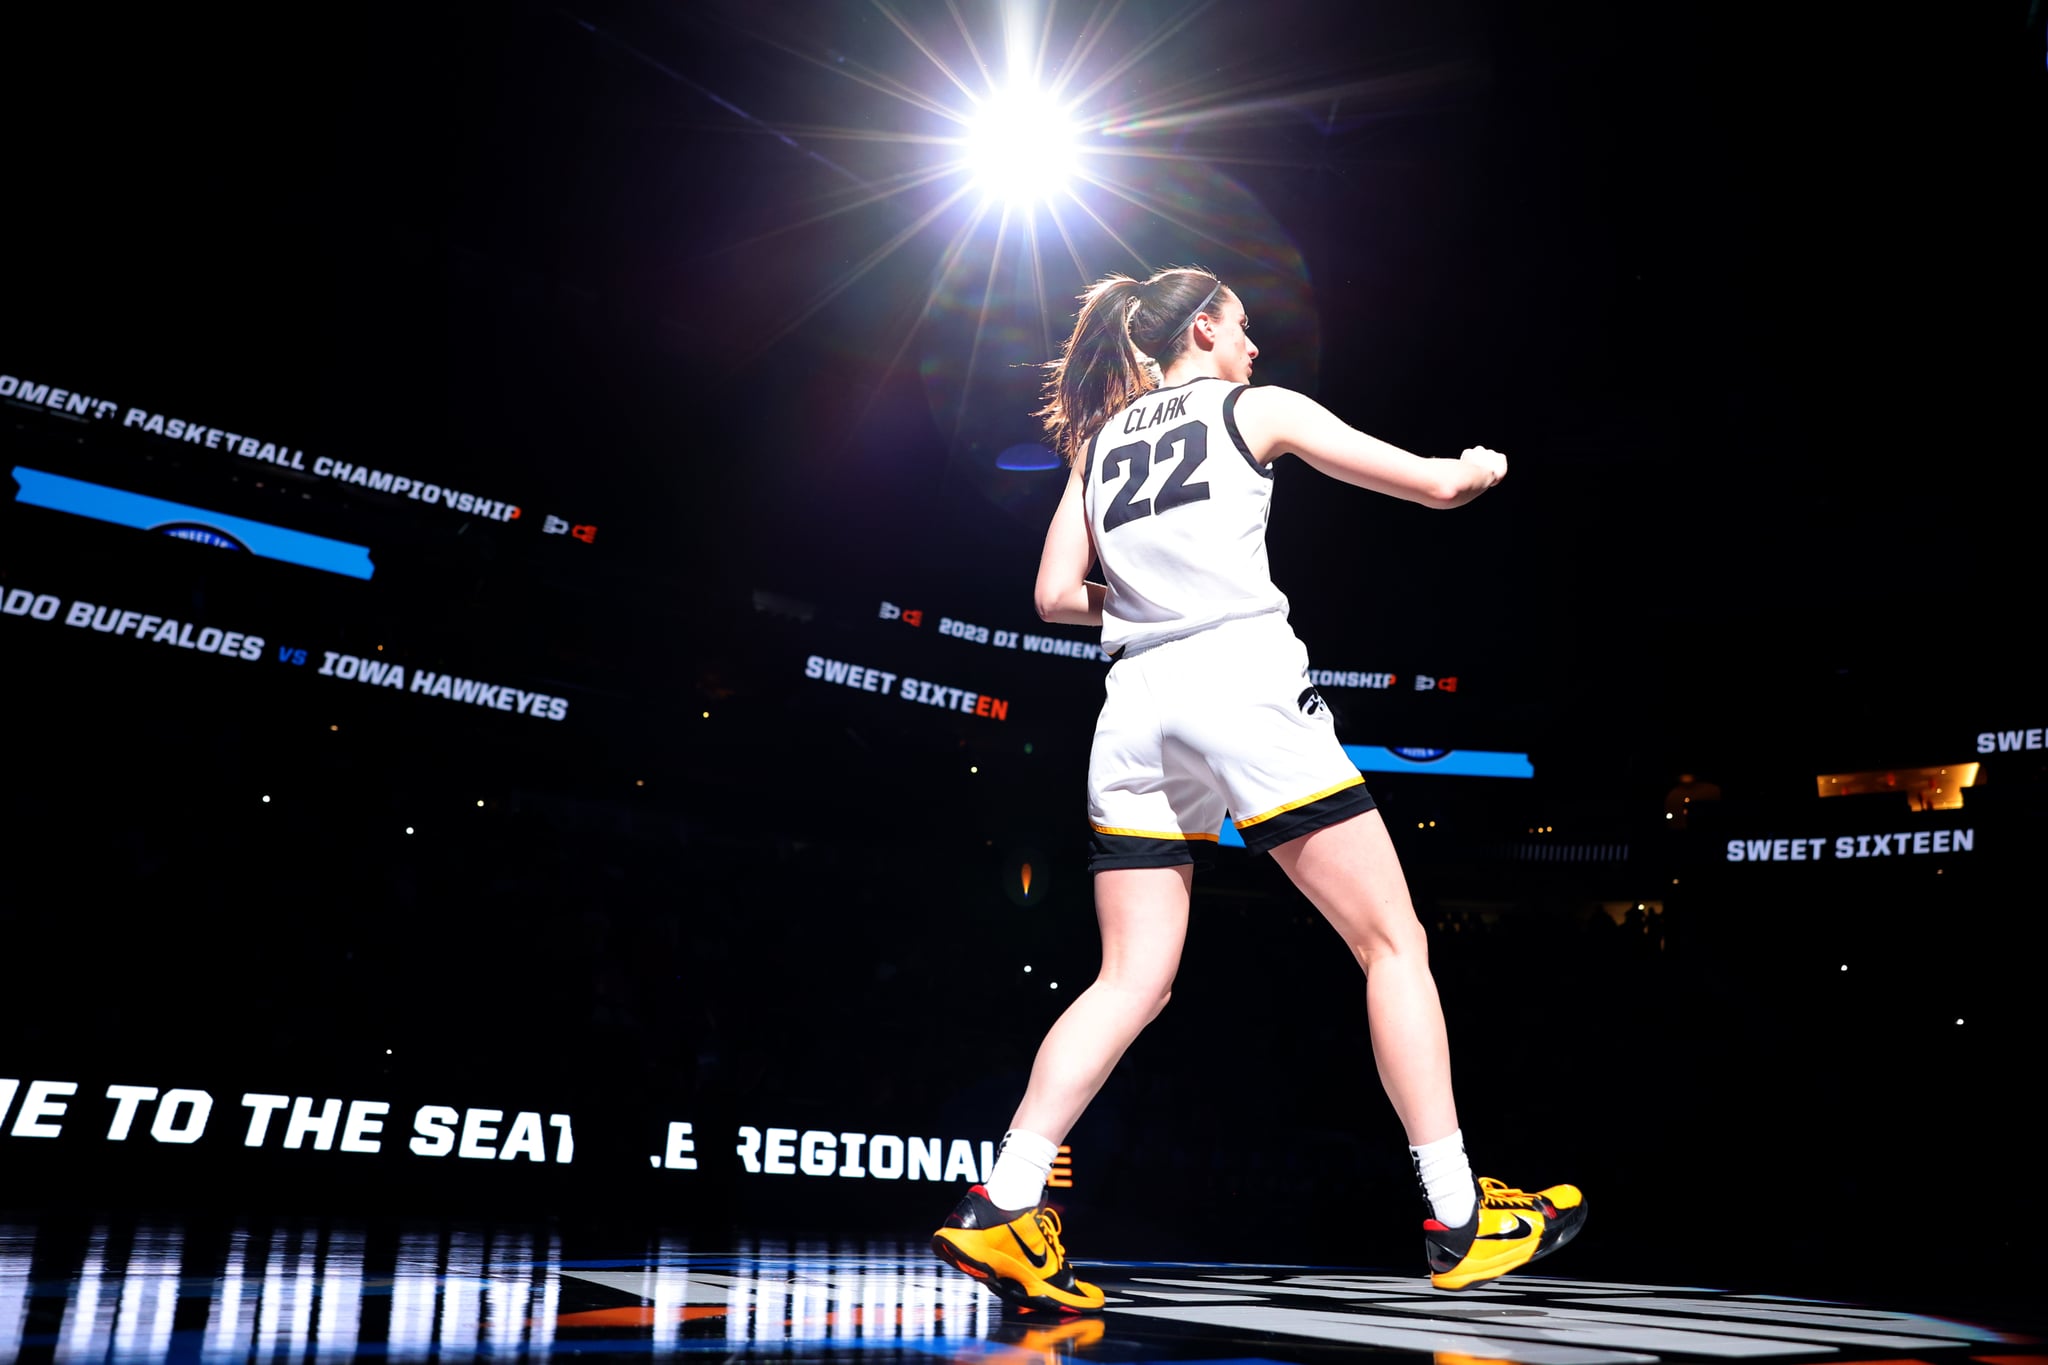 SEATTLE, WA - MARCH 24: Guard Caitlin Clark #22 of the Iowa Hawkeyes is introduced before the game against the Colorado Buffaloes during the Sweet Sixteen round of the 2023 NCAA Womens Basketball Tournament held at Climate Pledge Arena on March 24, 2023 in Seattle, Washington. (Photo by Tyler Schenk/NCAA Photos via Getty Images)